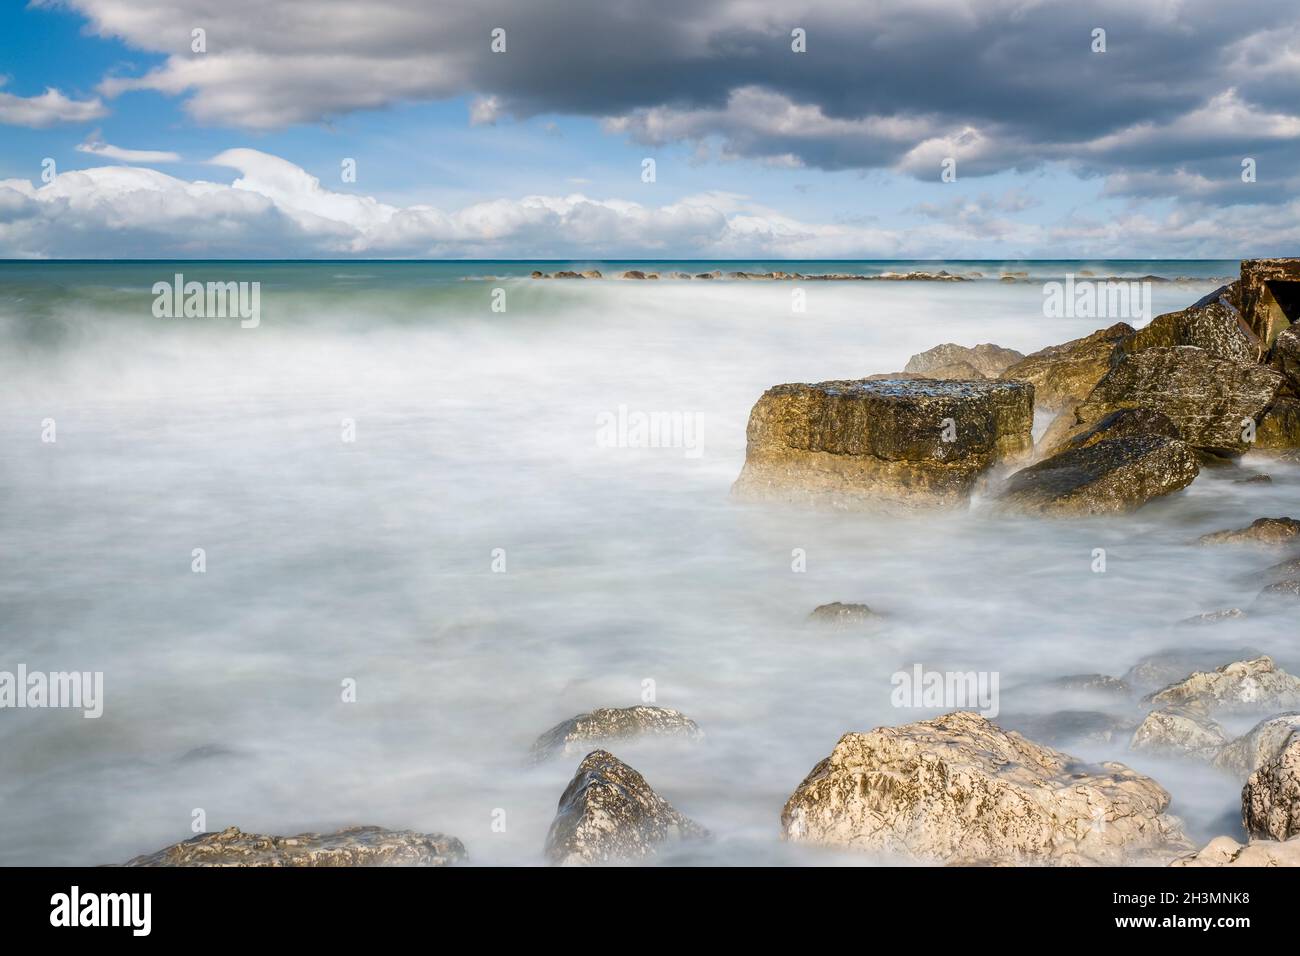 Cliffs in Adriatic sea. The sun's rays reflecting on the rocks. Long exposure. Stock Photo